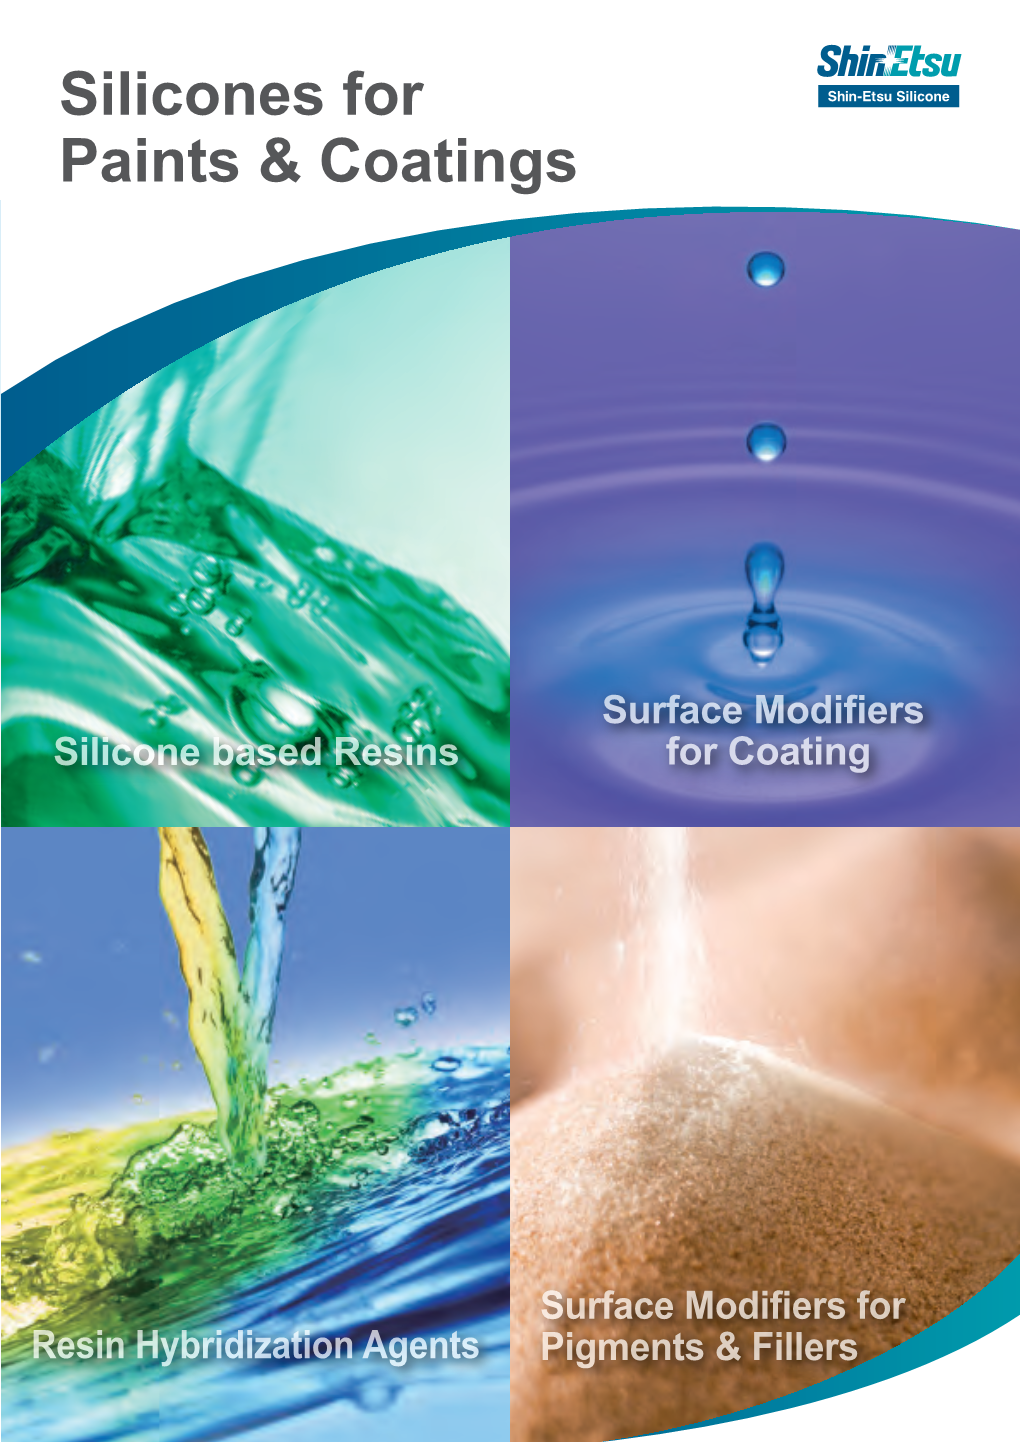 Silicones for Paints & Coatings